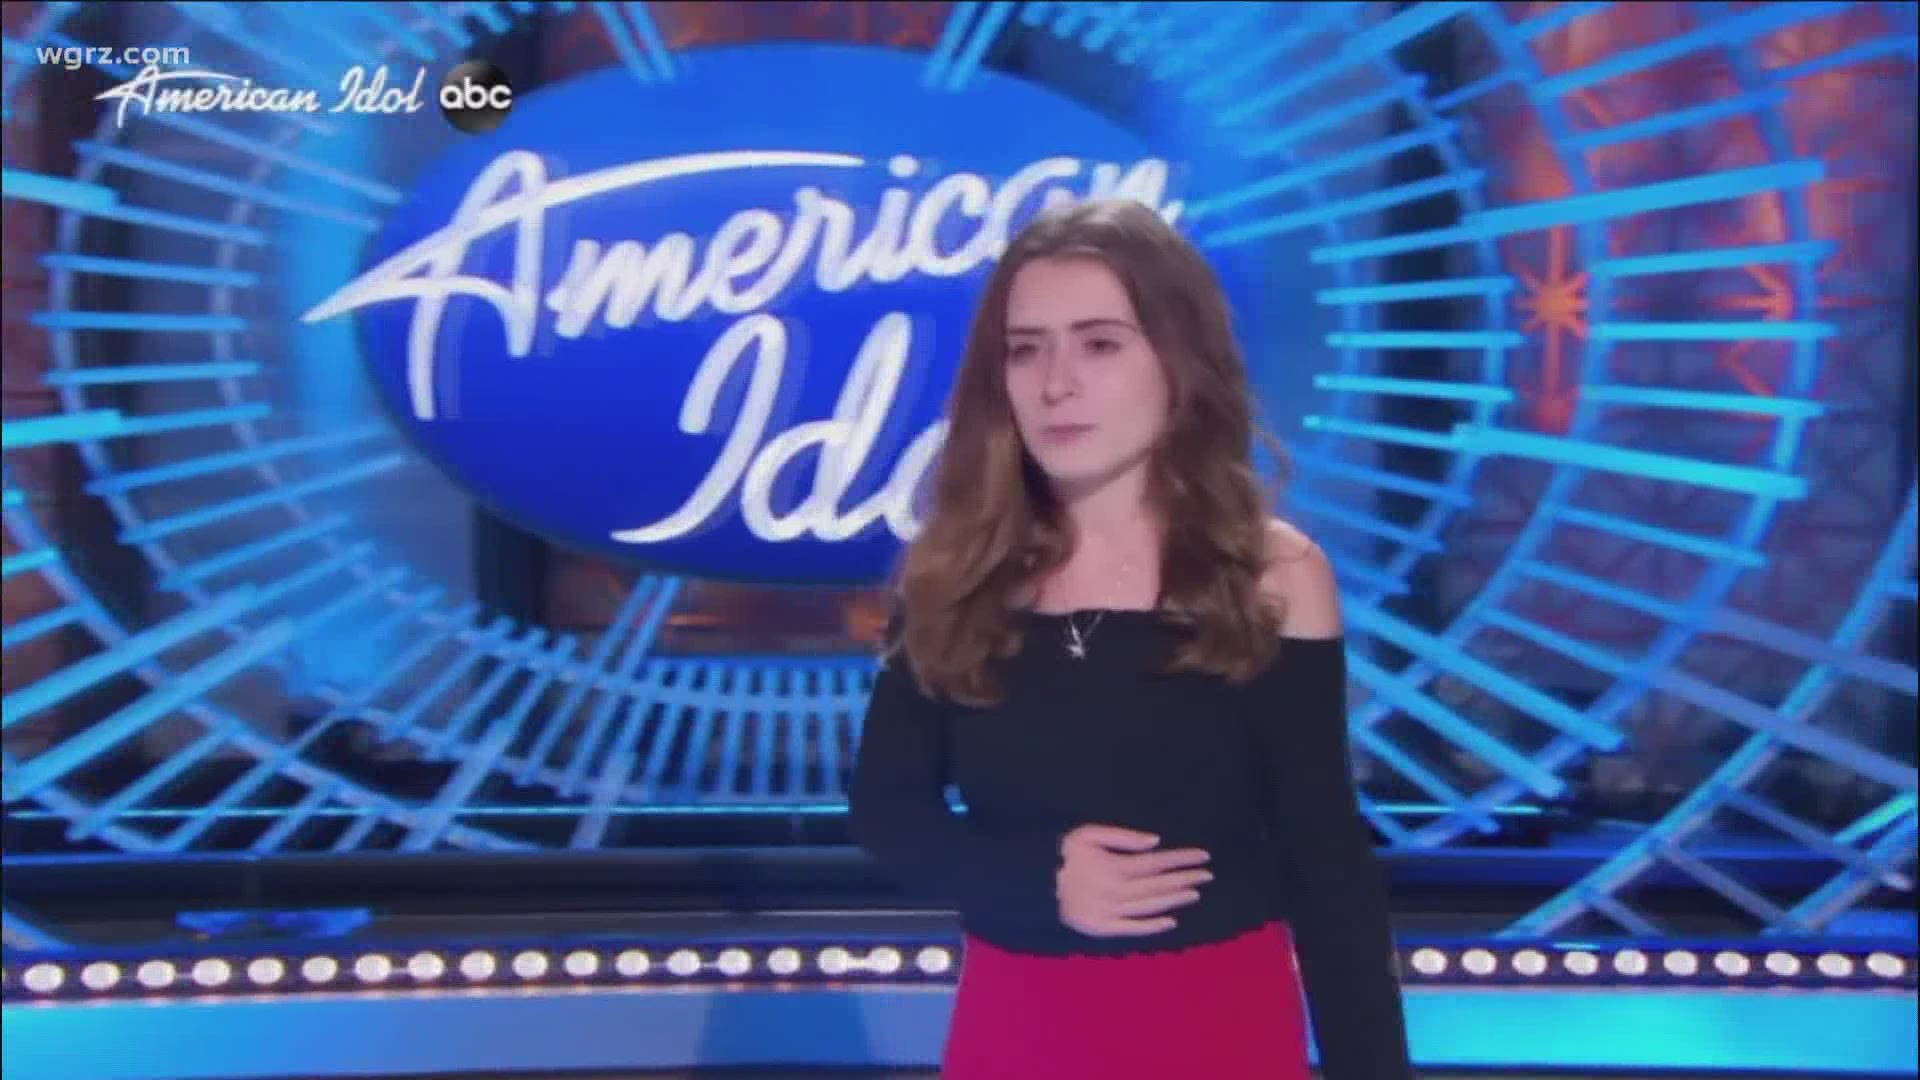 A local teen impressed American Idol judges and is heading to Hollywood